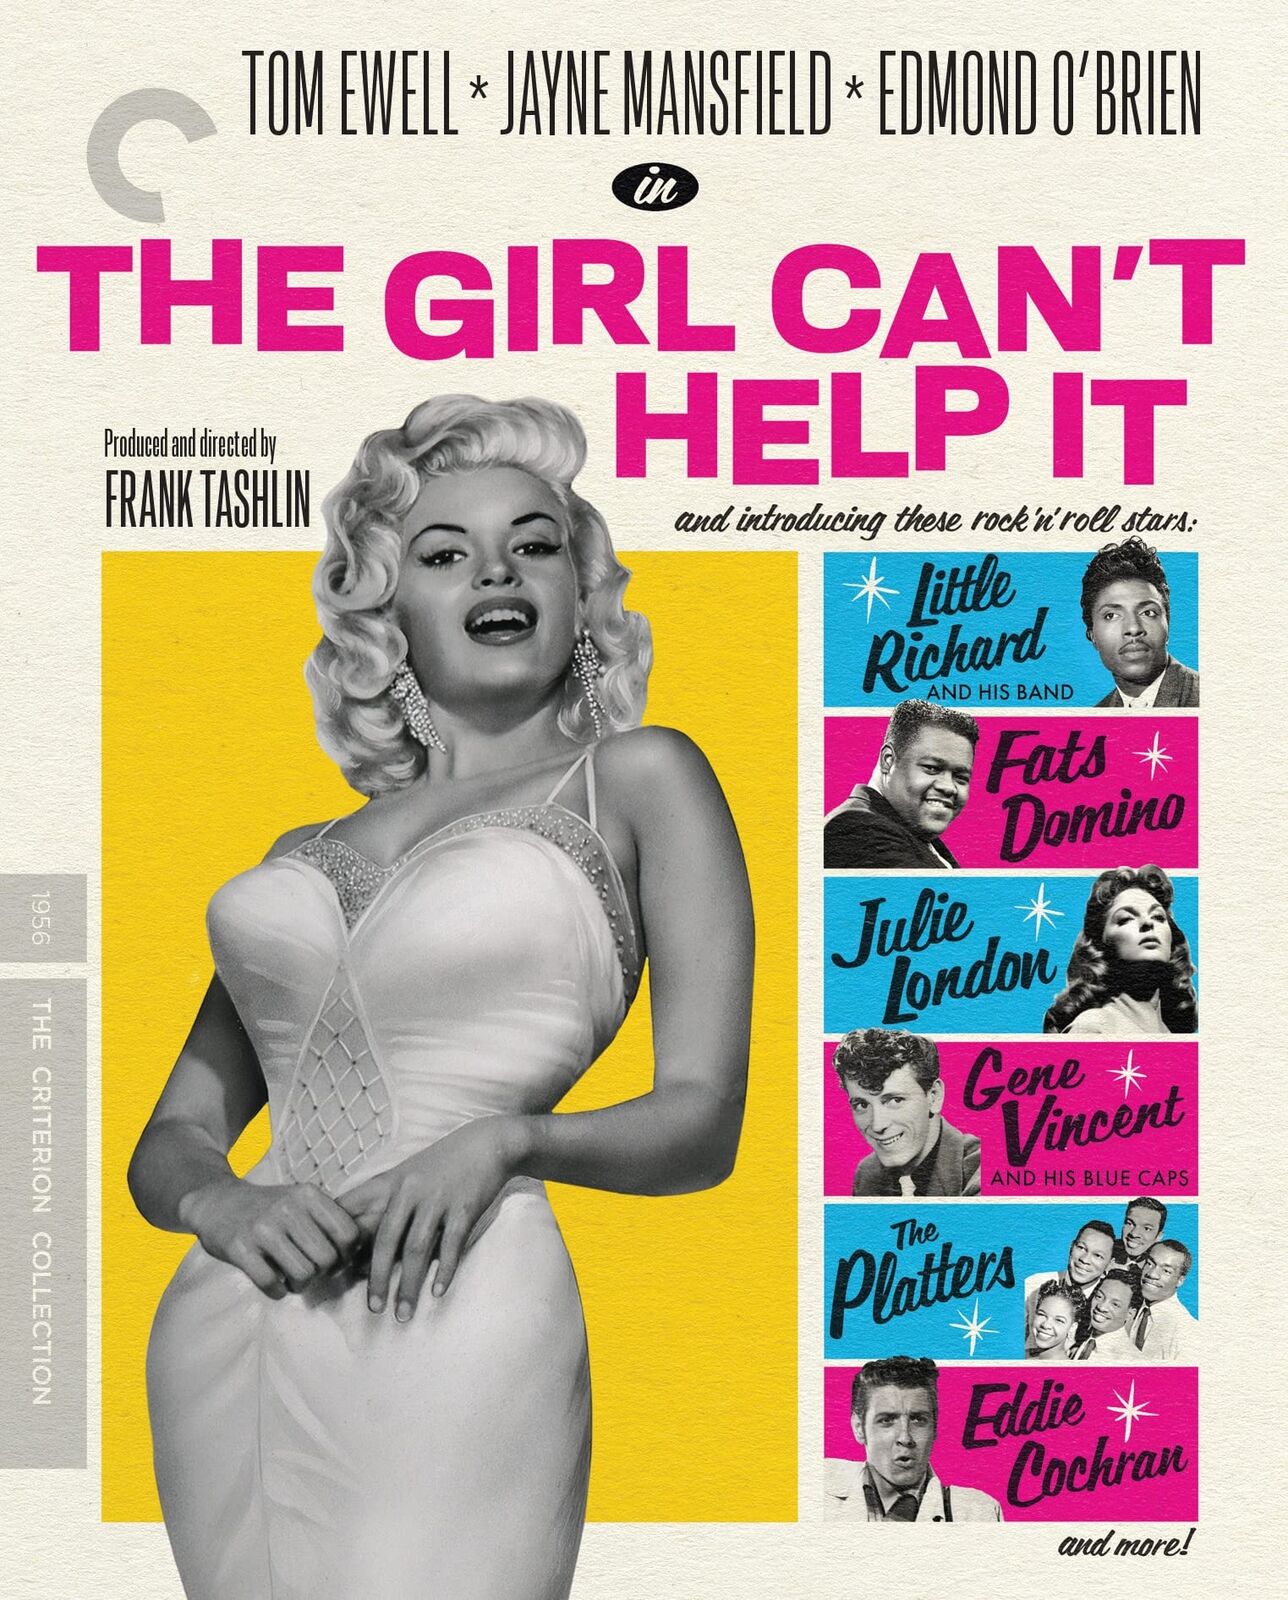 The Girl Can’t Help It (The Criterion Collection) (Blu-ray)